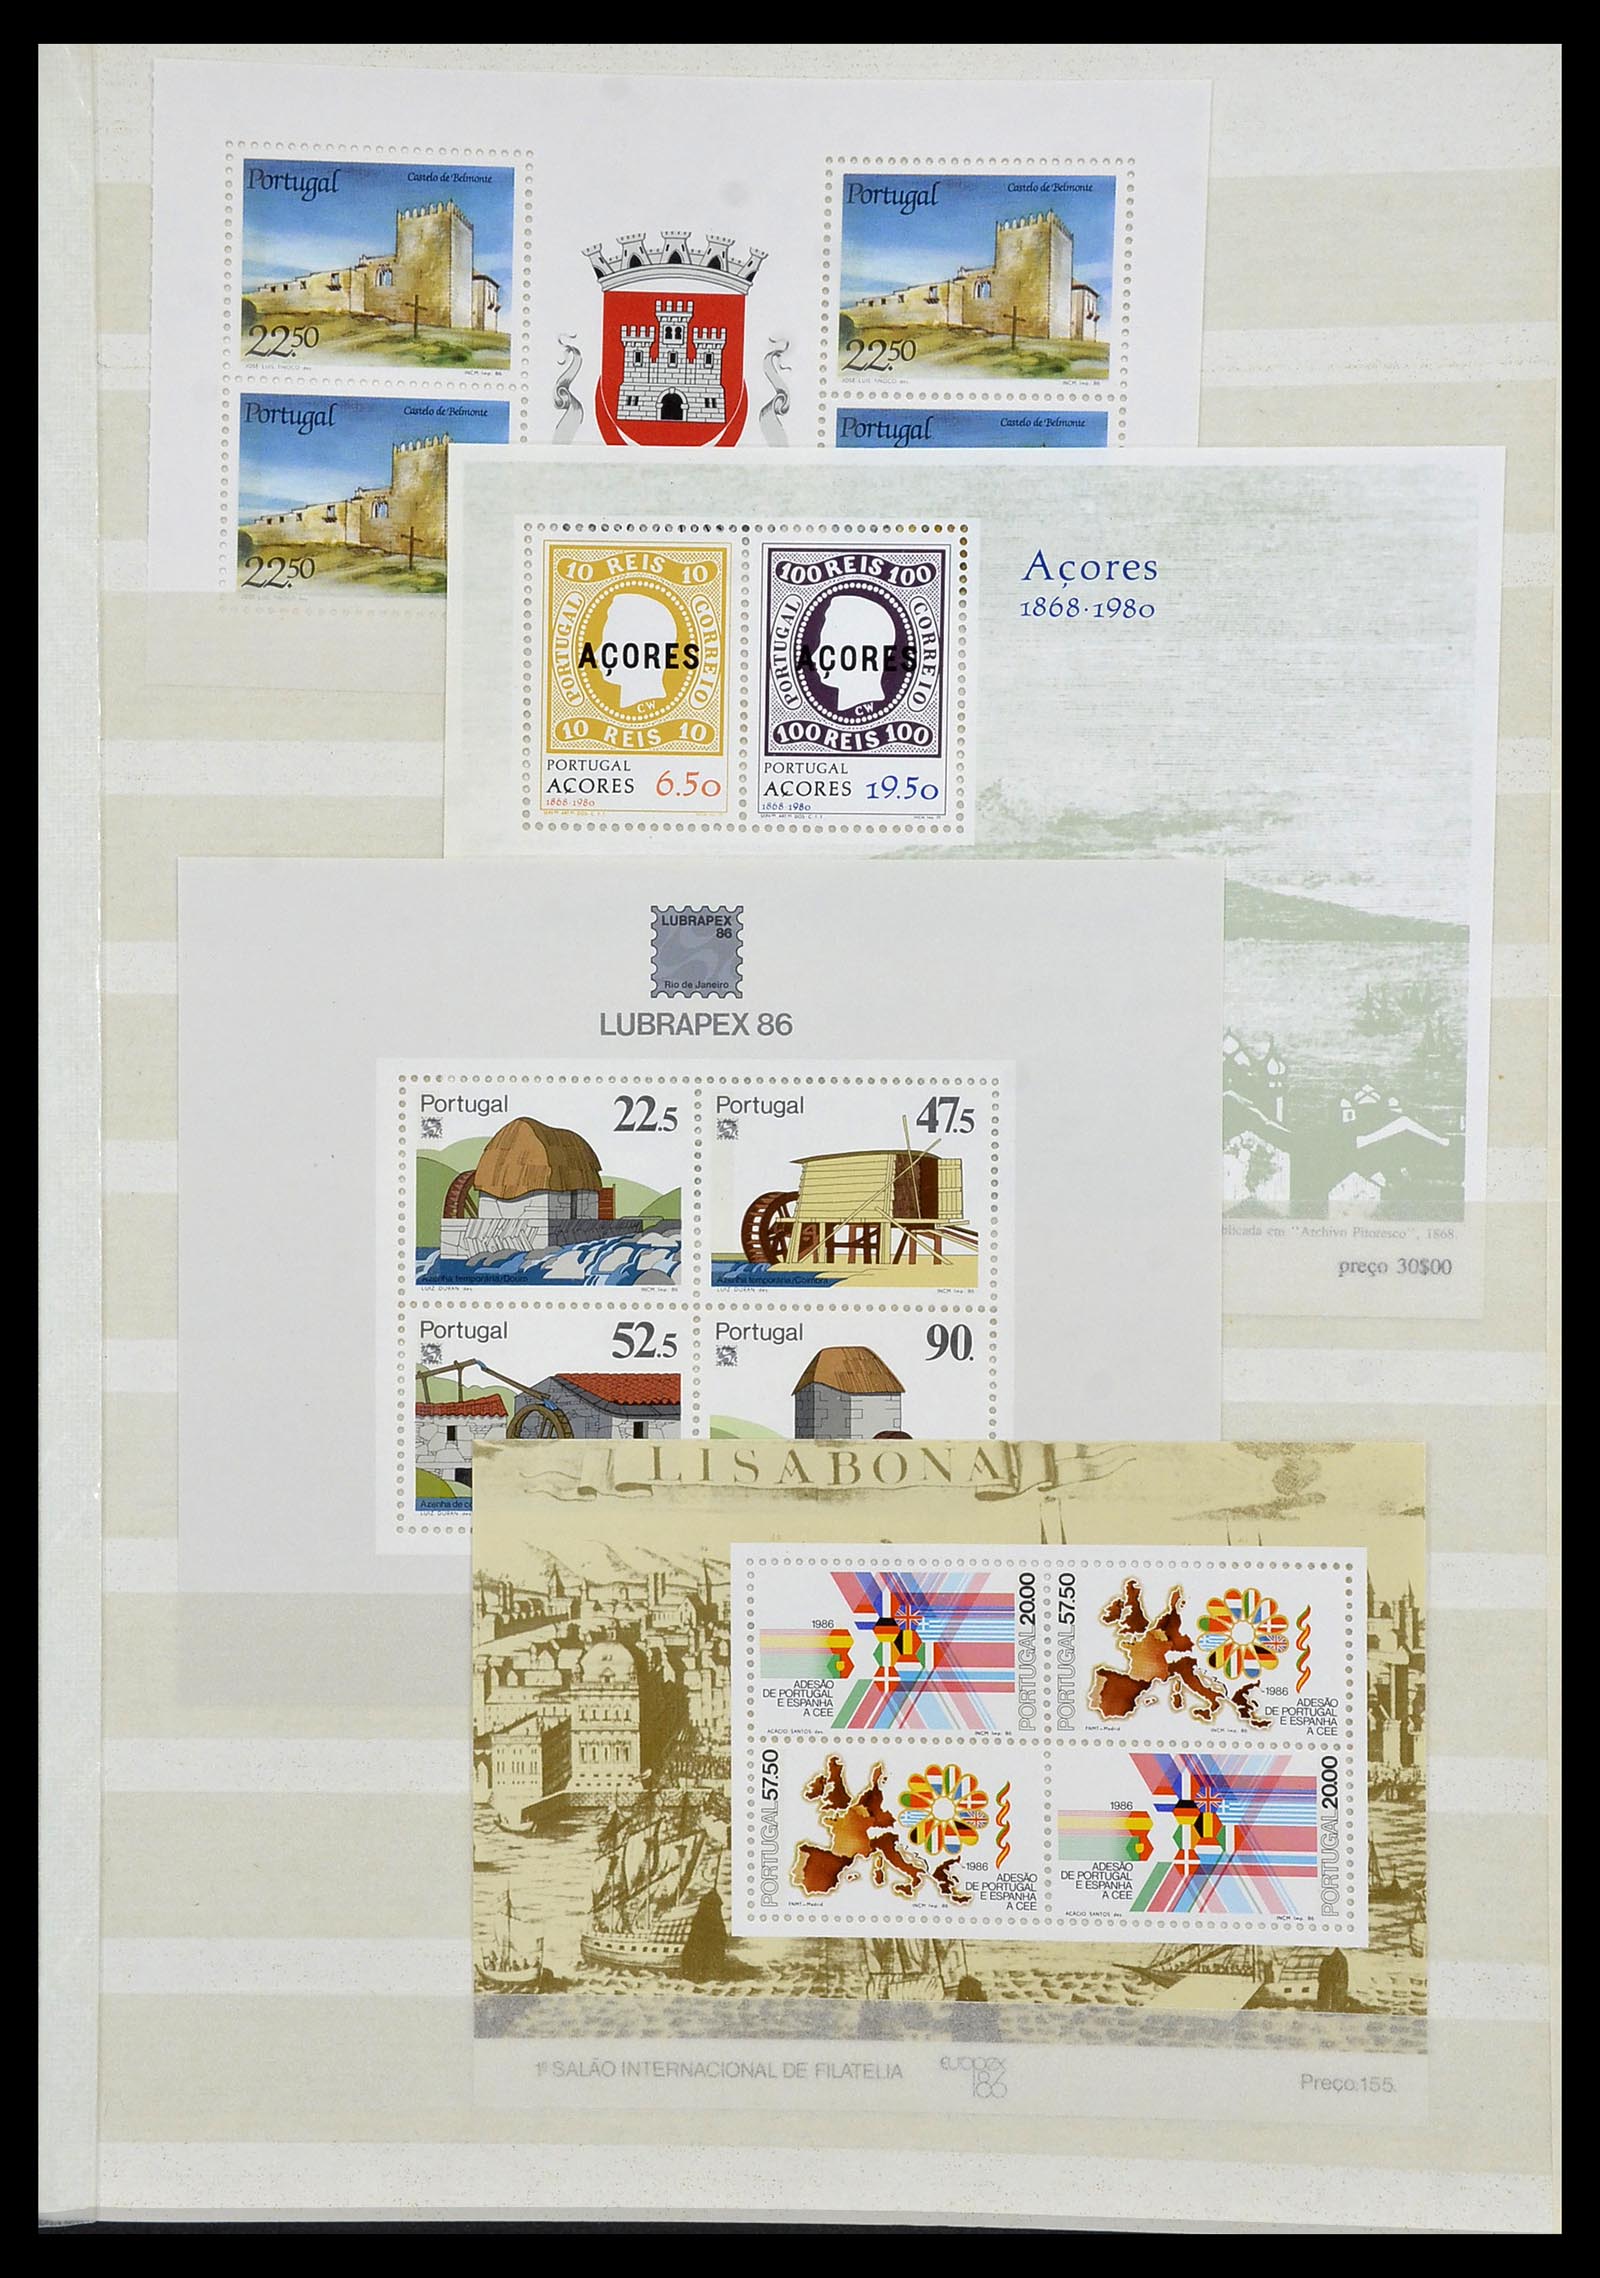 34045 021 - Stamp collection 34045 Western Europe souvenir sheets 1973-1986.